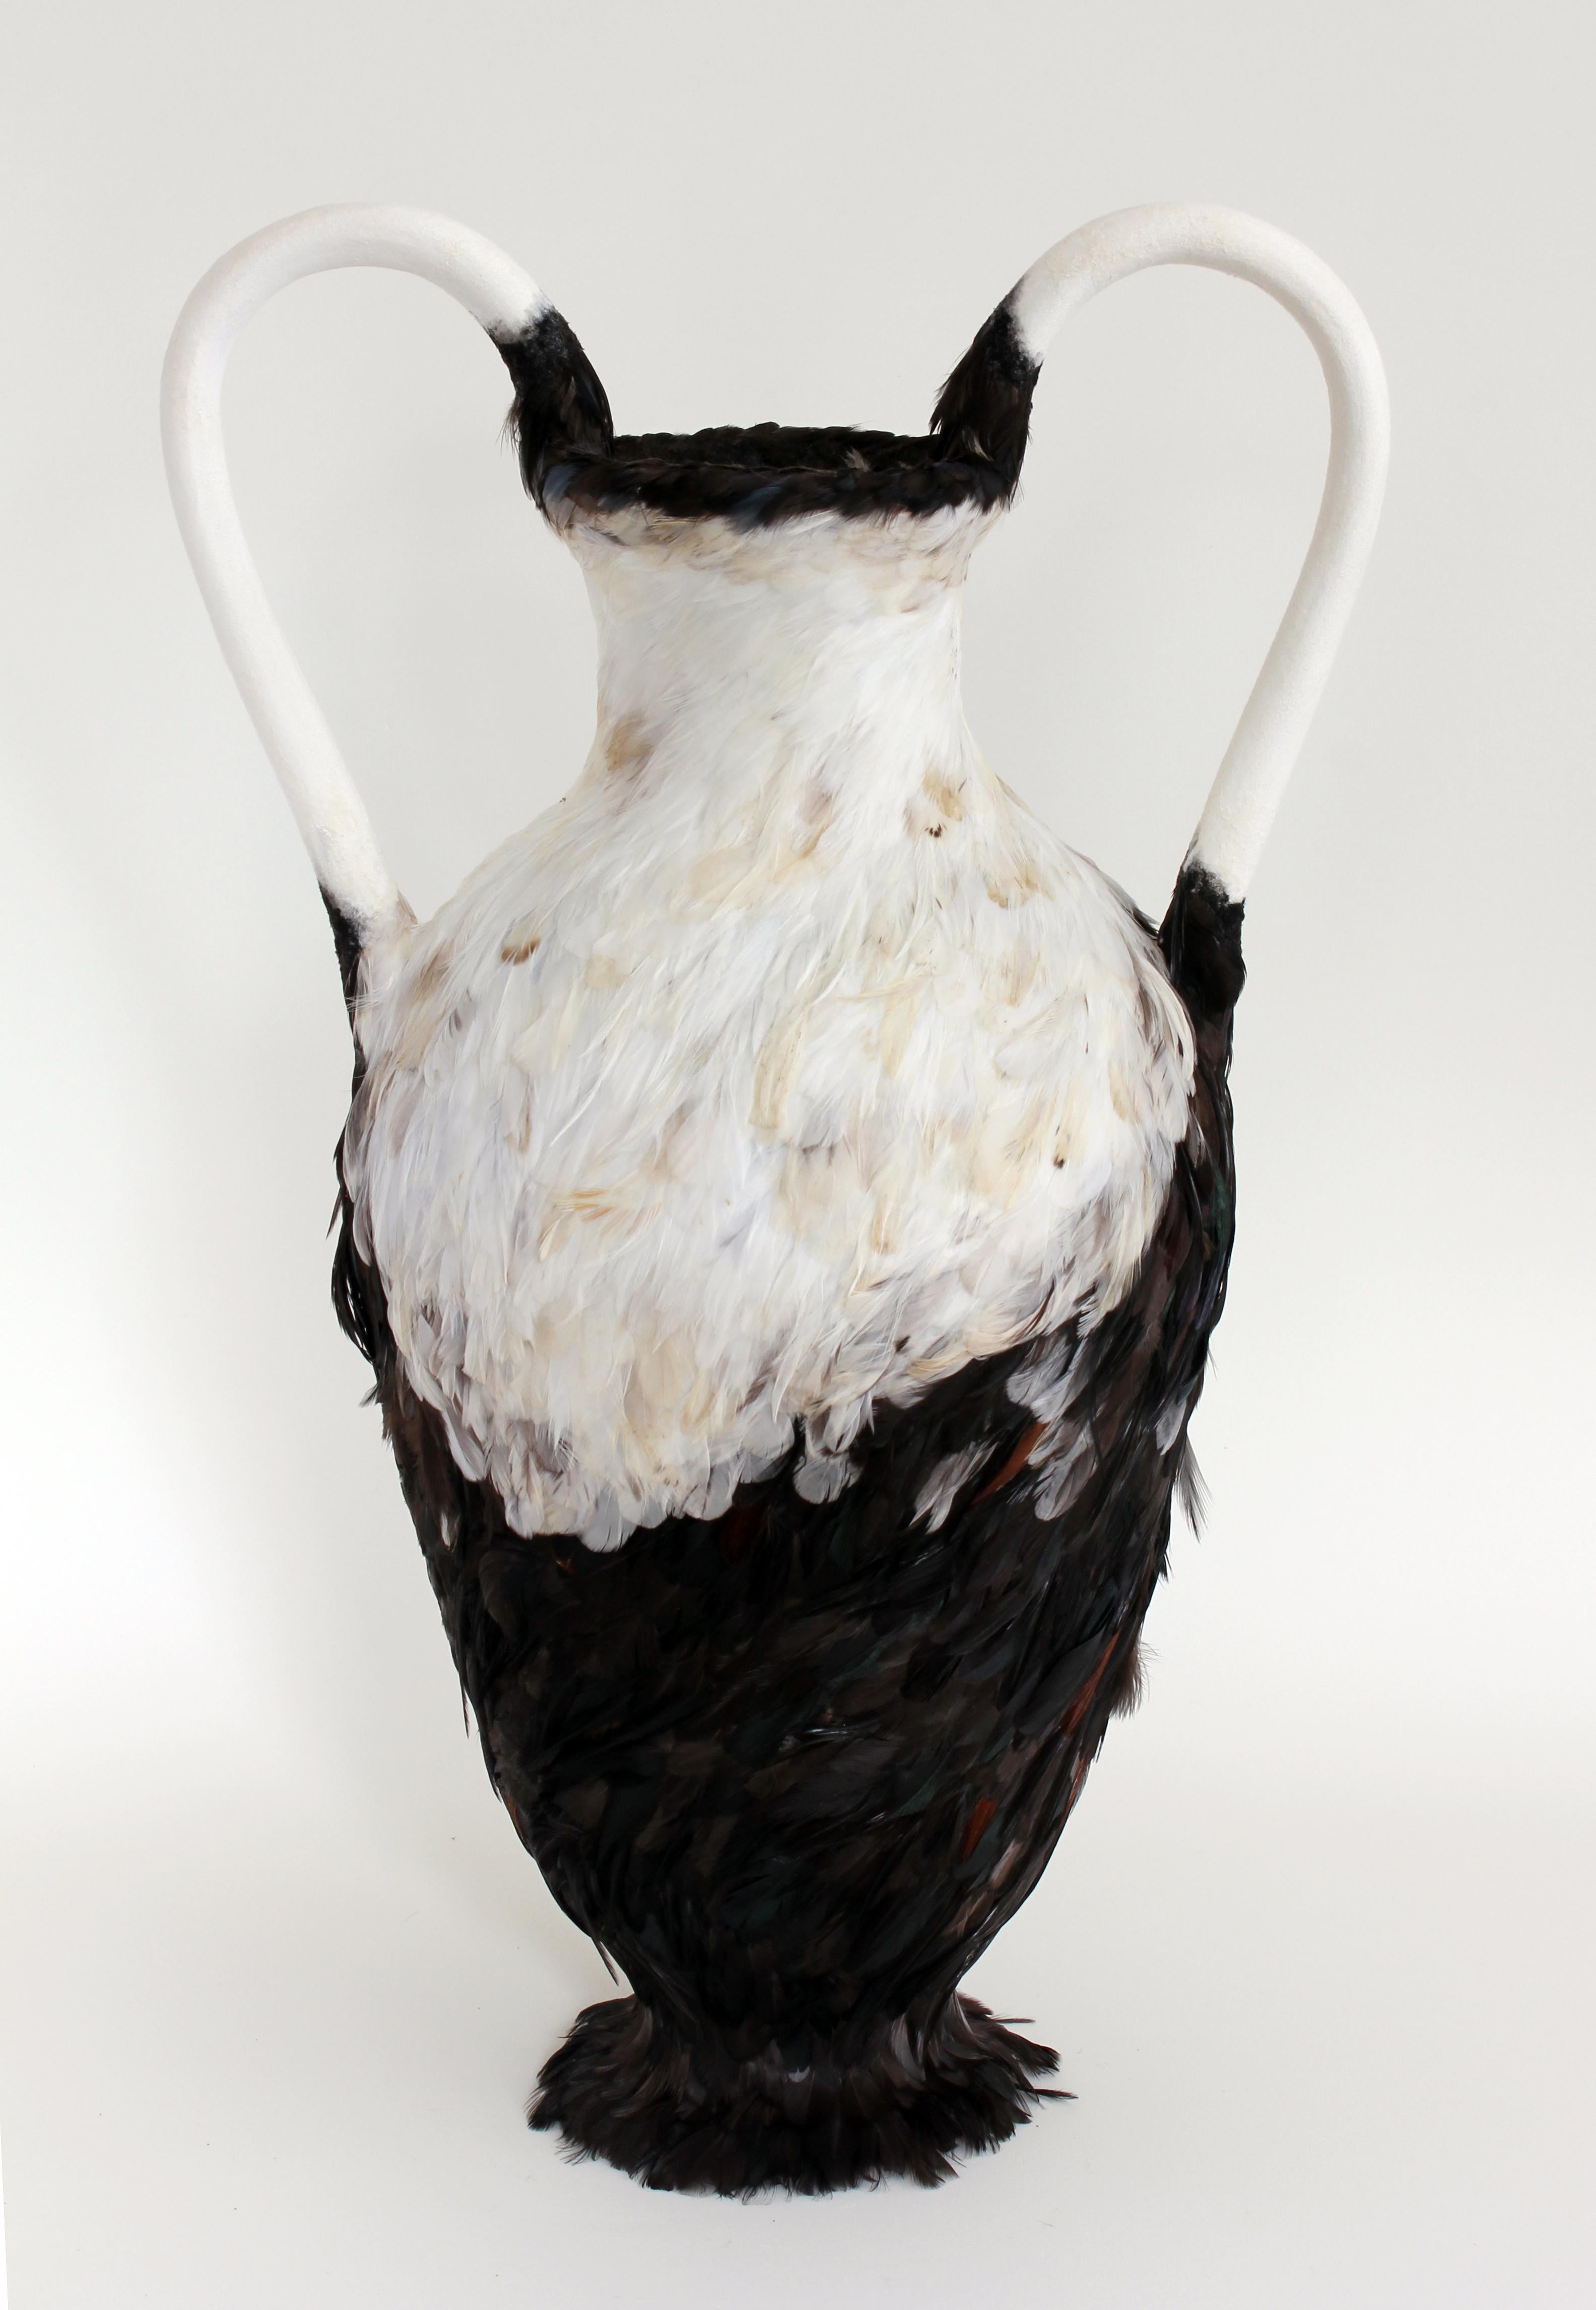 "White-Necked Amphora", Contemporary, Mixed Media, Ceramic, Sculpture, Feathers